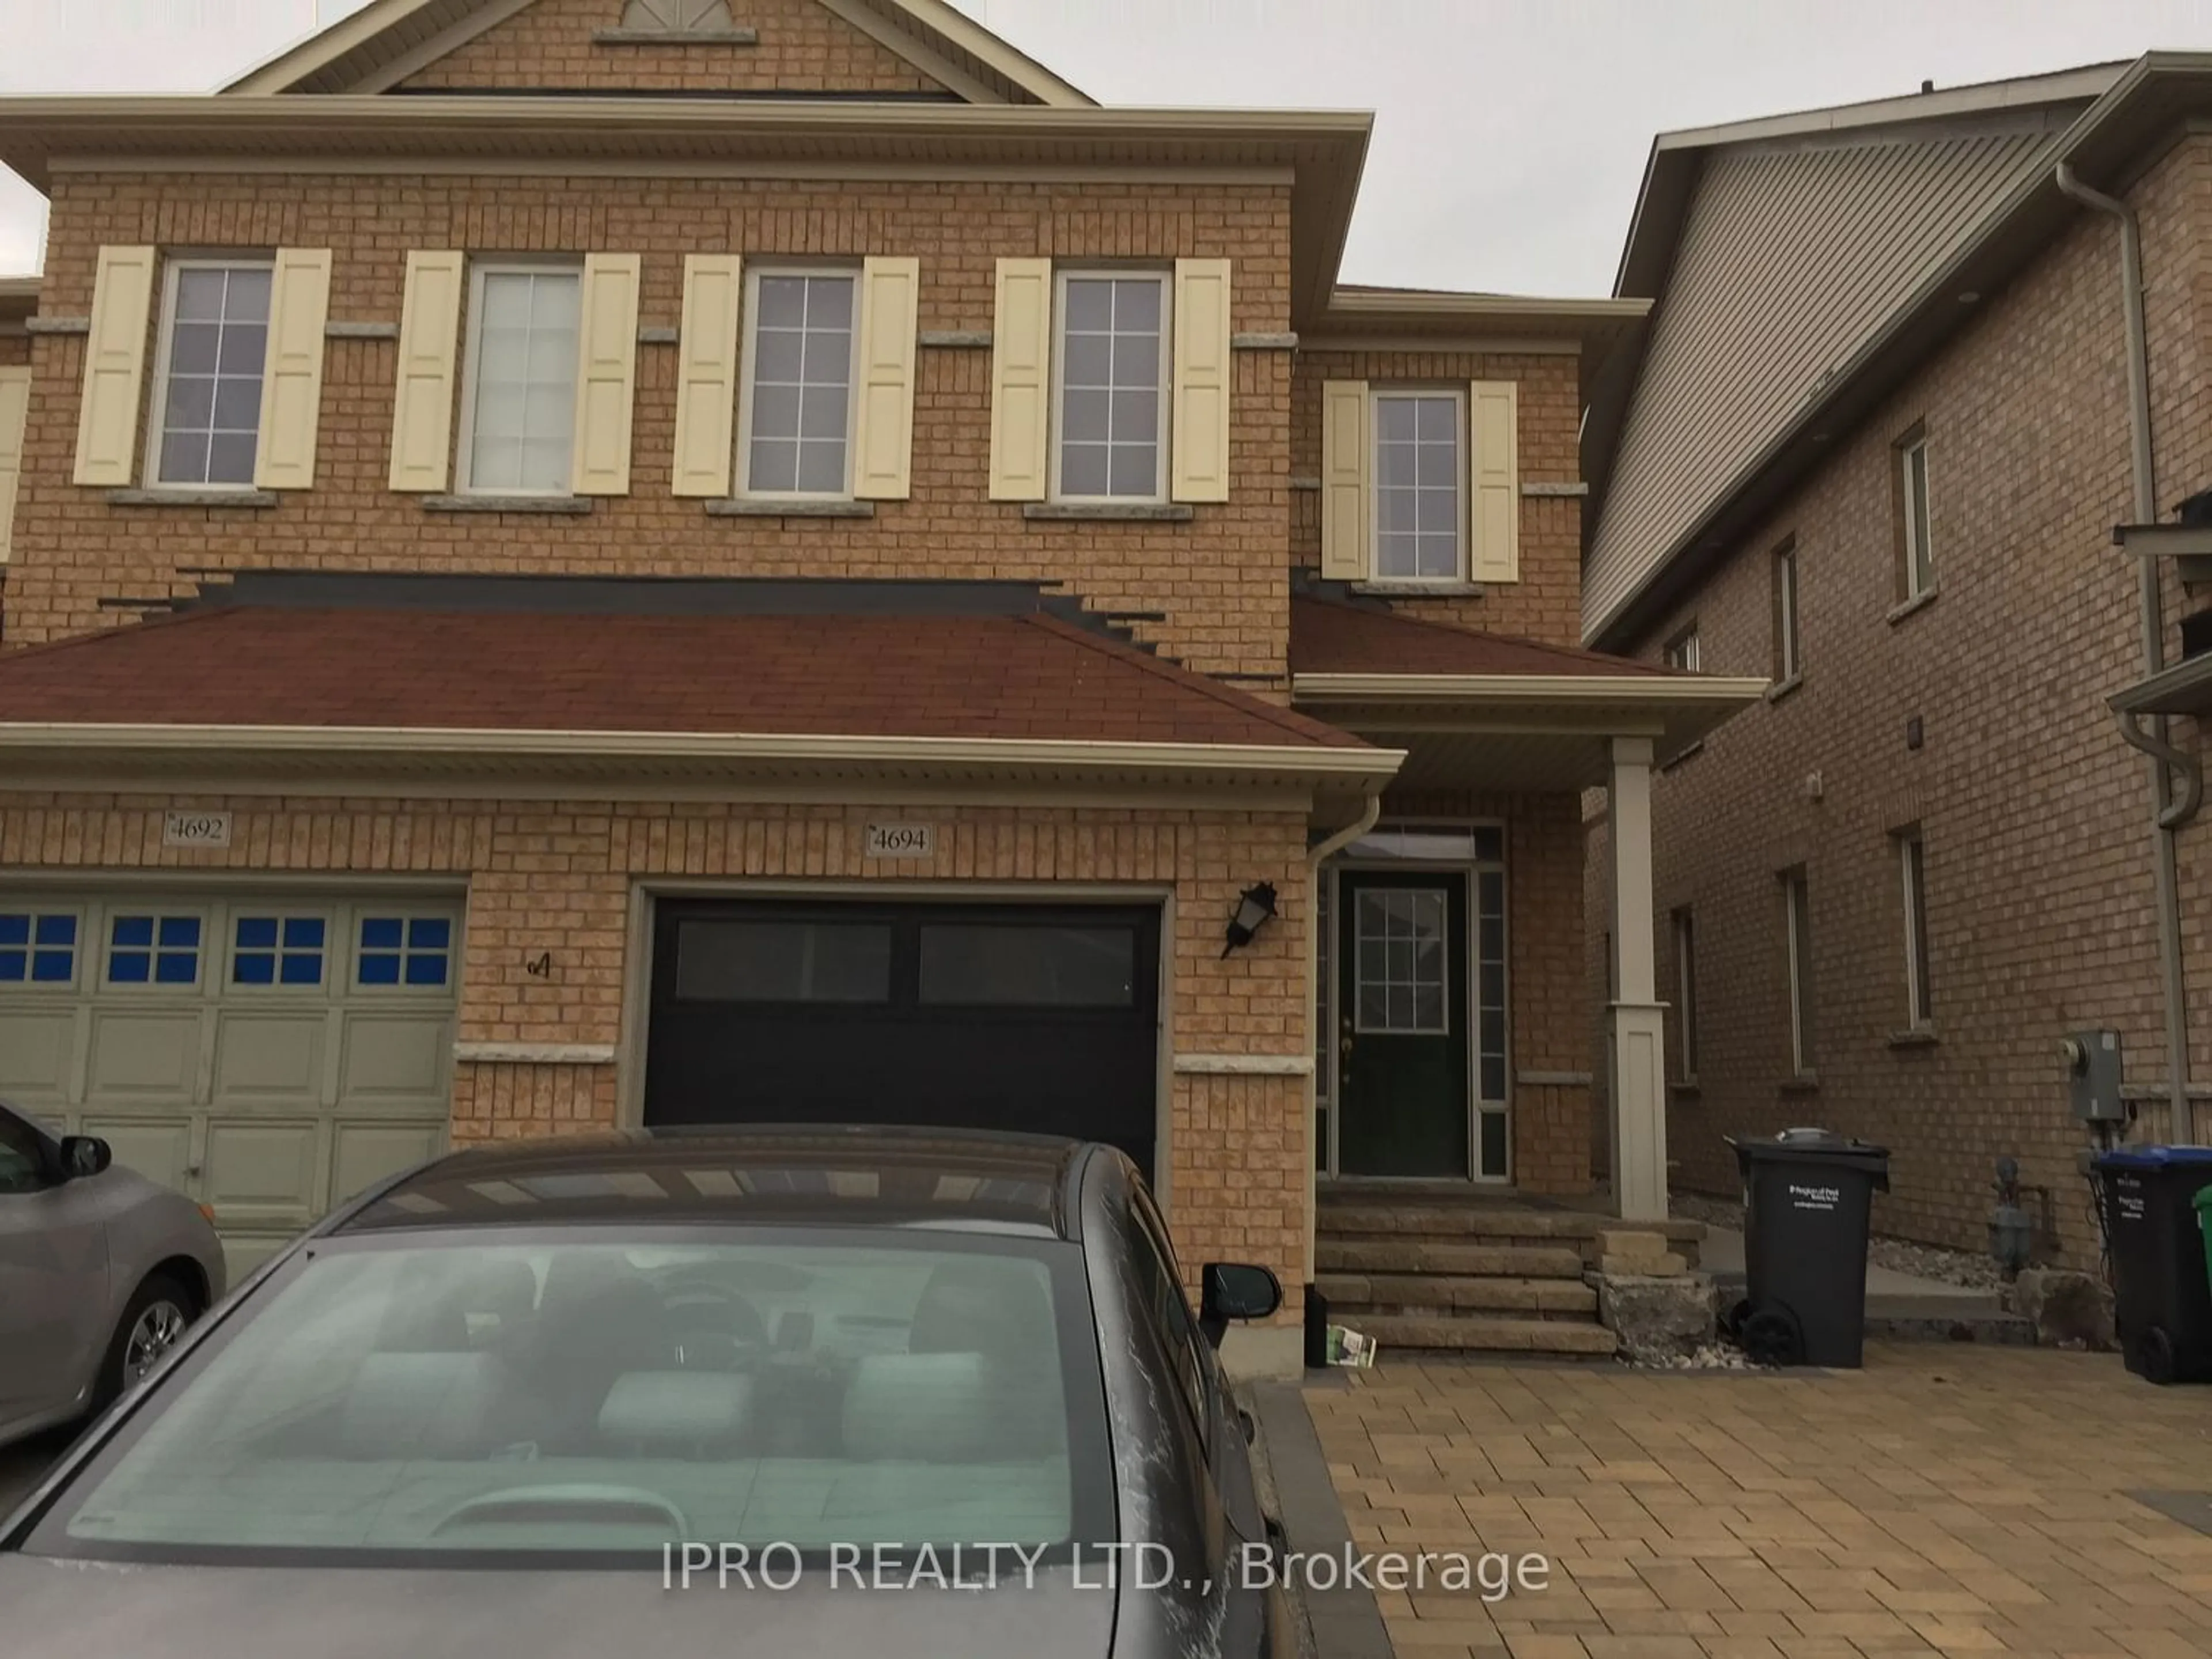 Home with brick exterior material for 4694 Centretown Way, Mississauga Ontario L5R 0C9